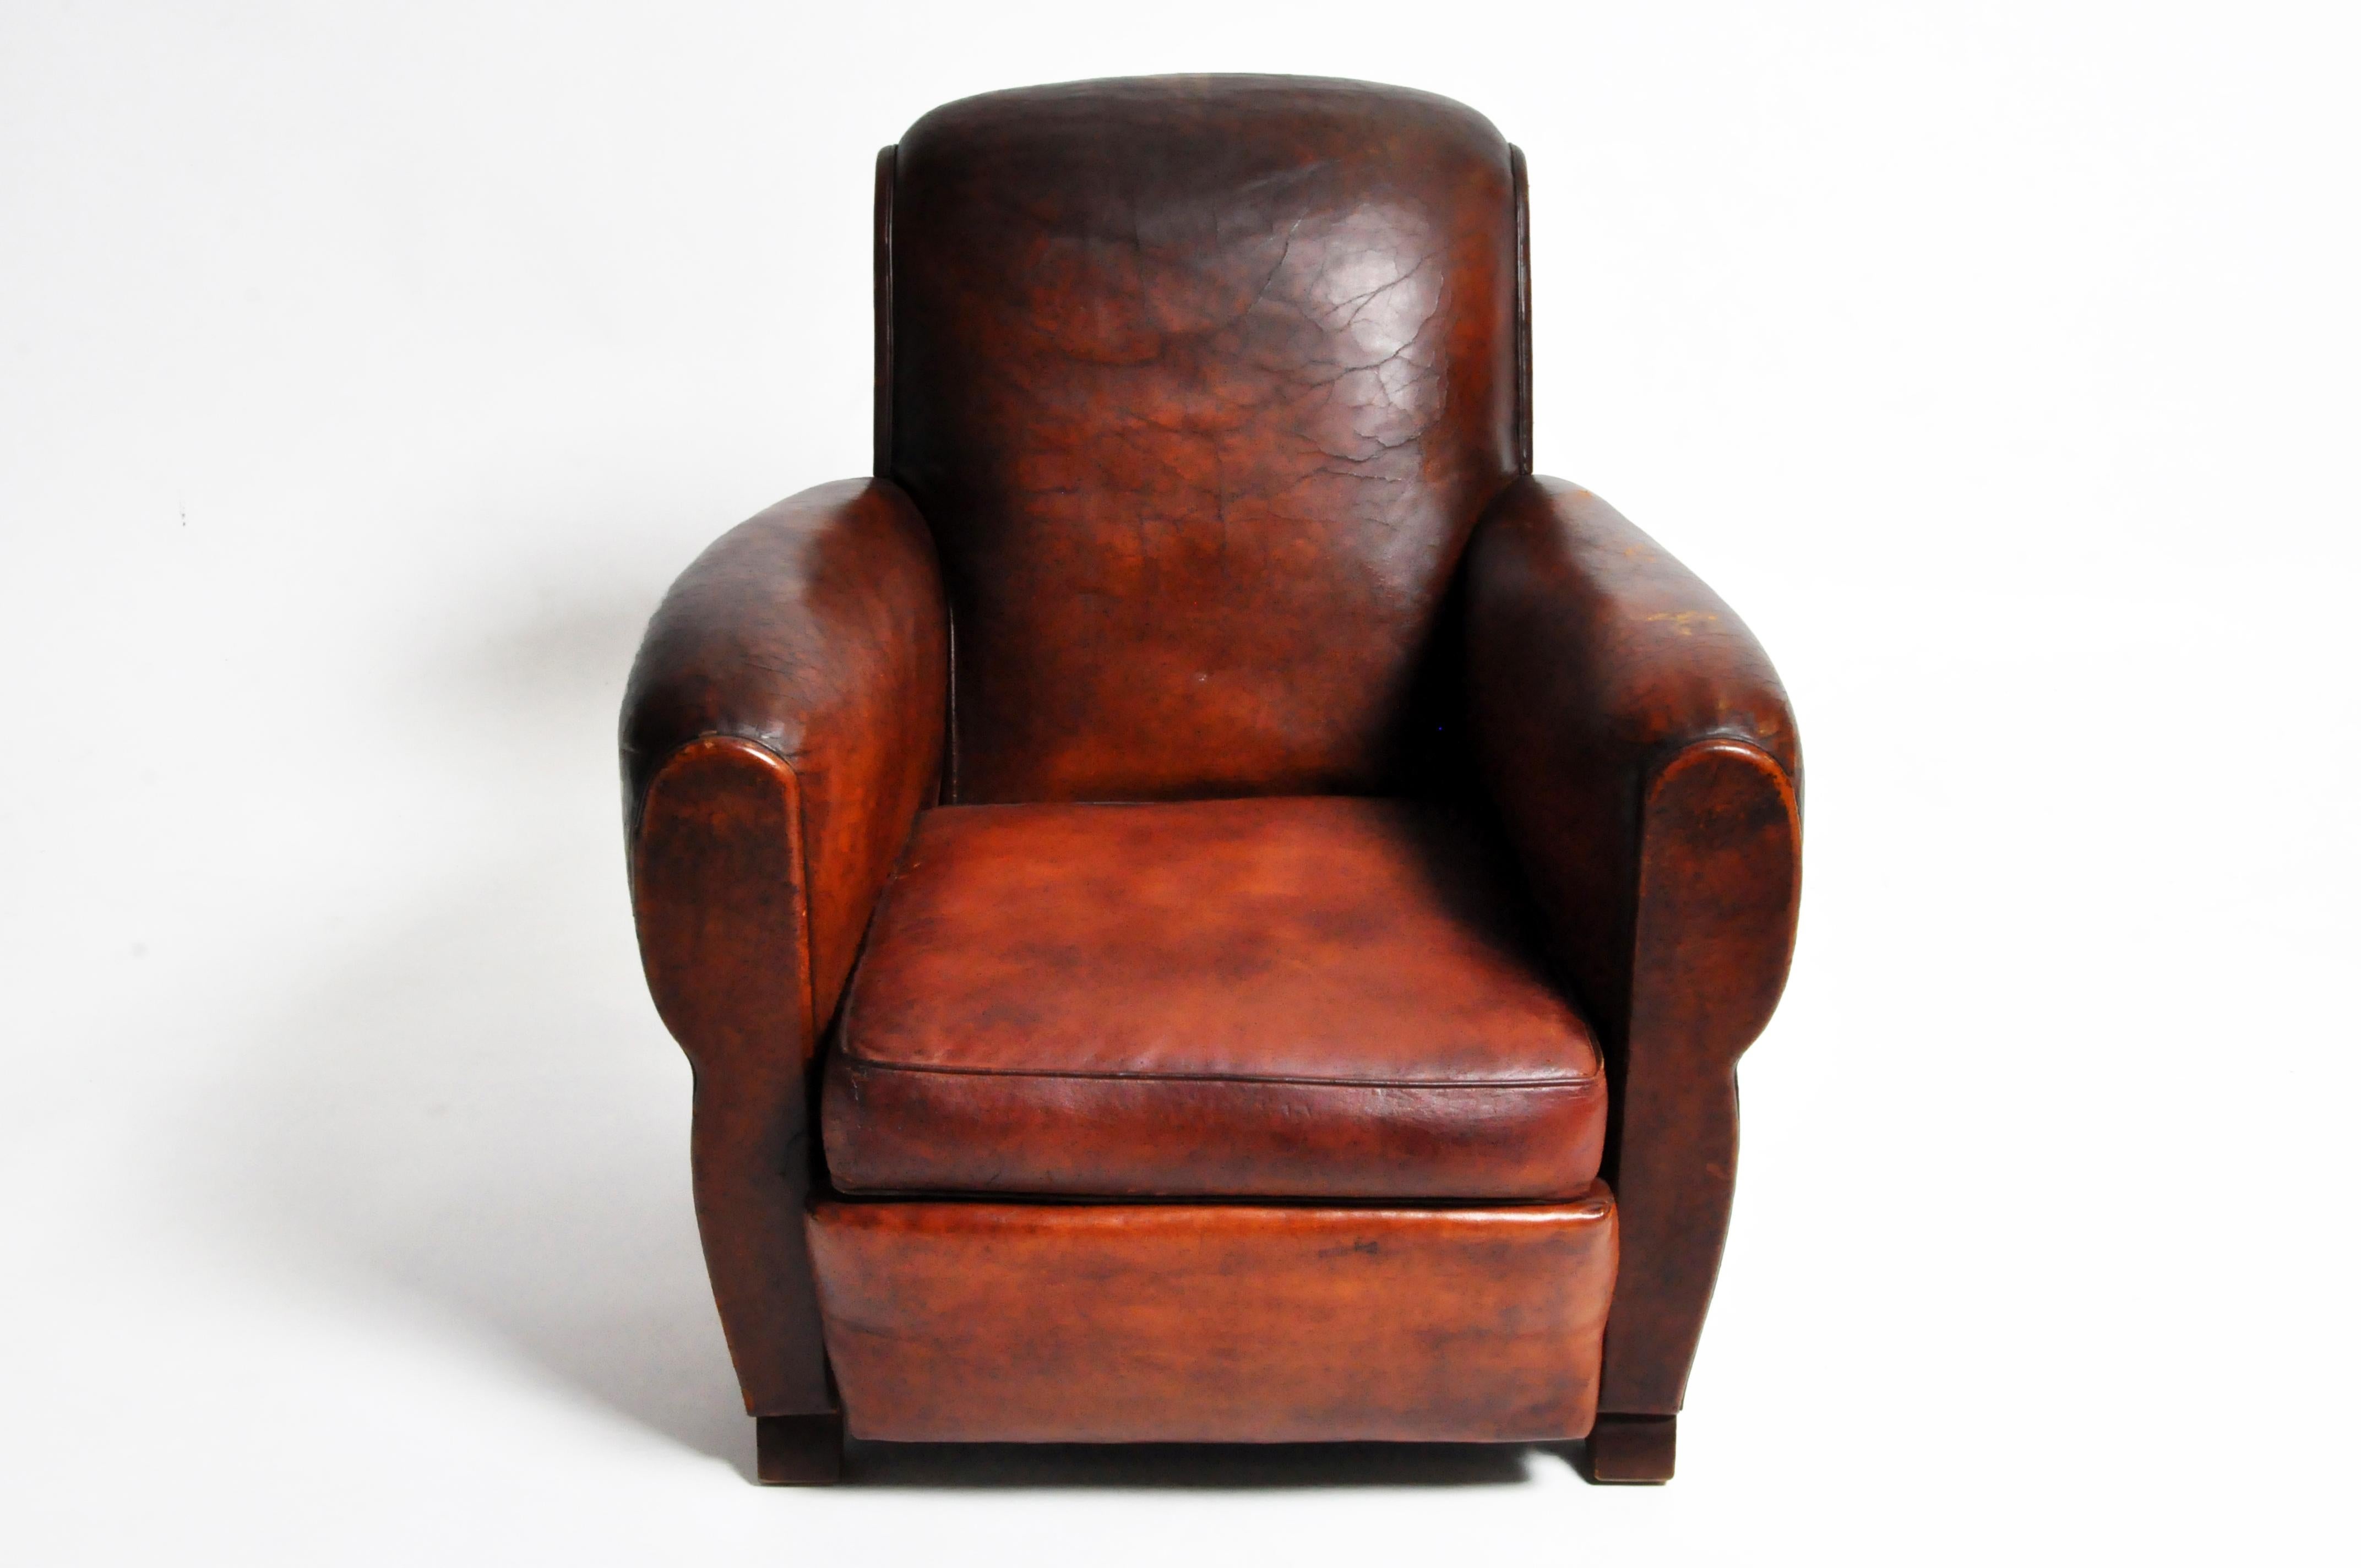 This Classic French Art Deco armchair is made from leather and dates to the 1940's. The shape of the chair is elegant, with simple and curvaceous rolled arms and back that are not overly bulbous (as many French Deco chairs appear). It exudes quiet